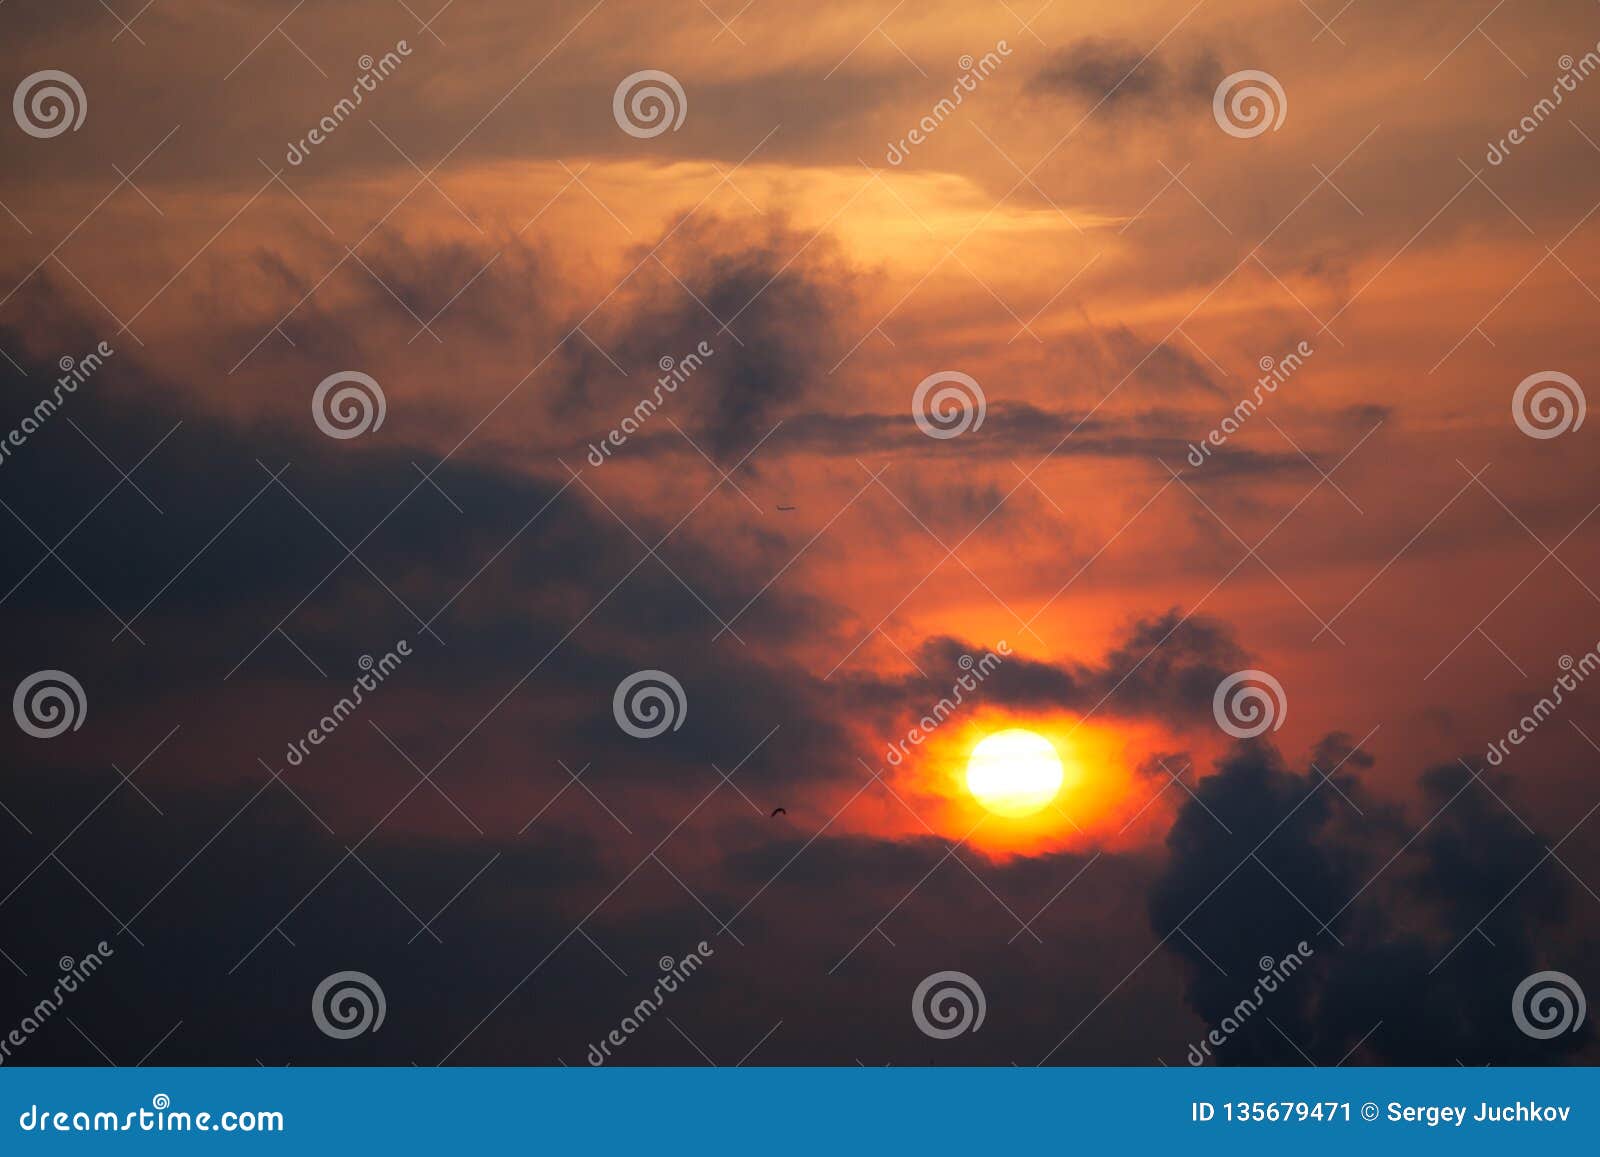 Sunrise with bird and aircraft